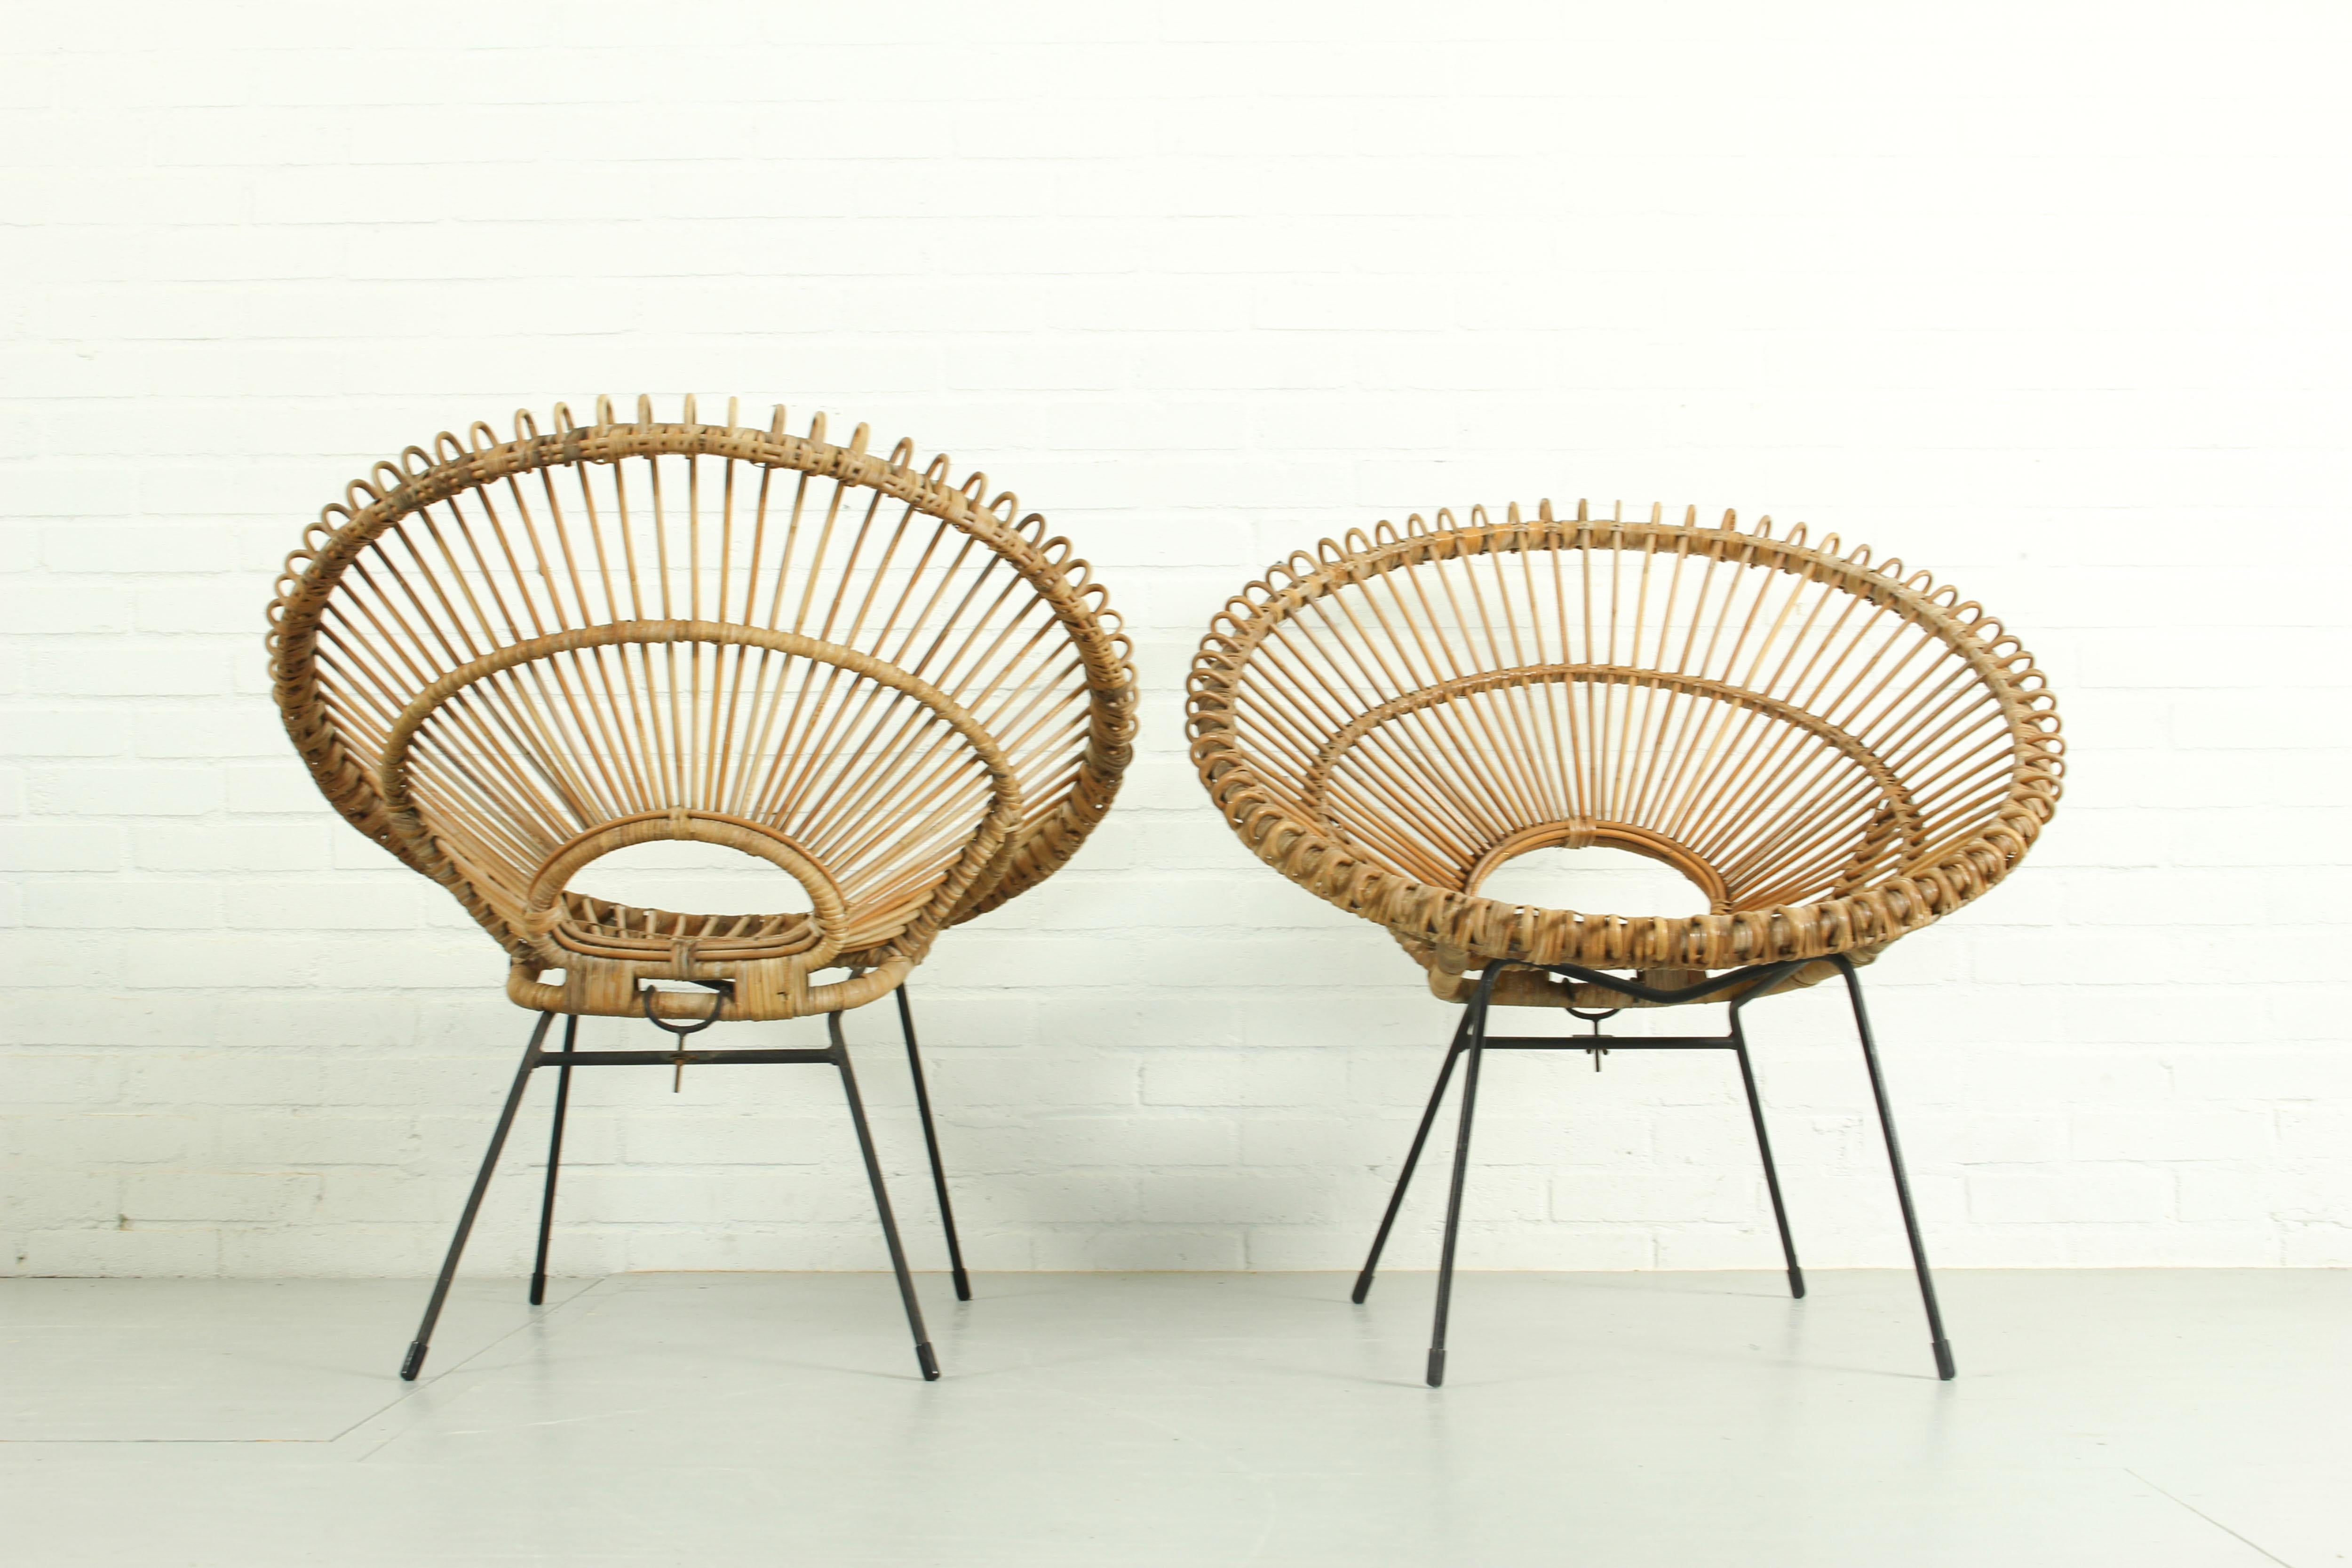 Dutch Set of 2 sunburst chairs by Rohe Noordwolde, 1950s. For Sale